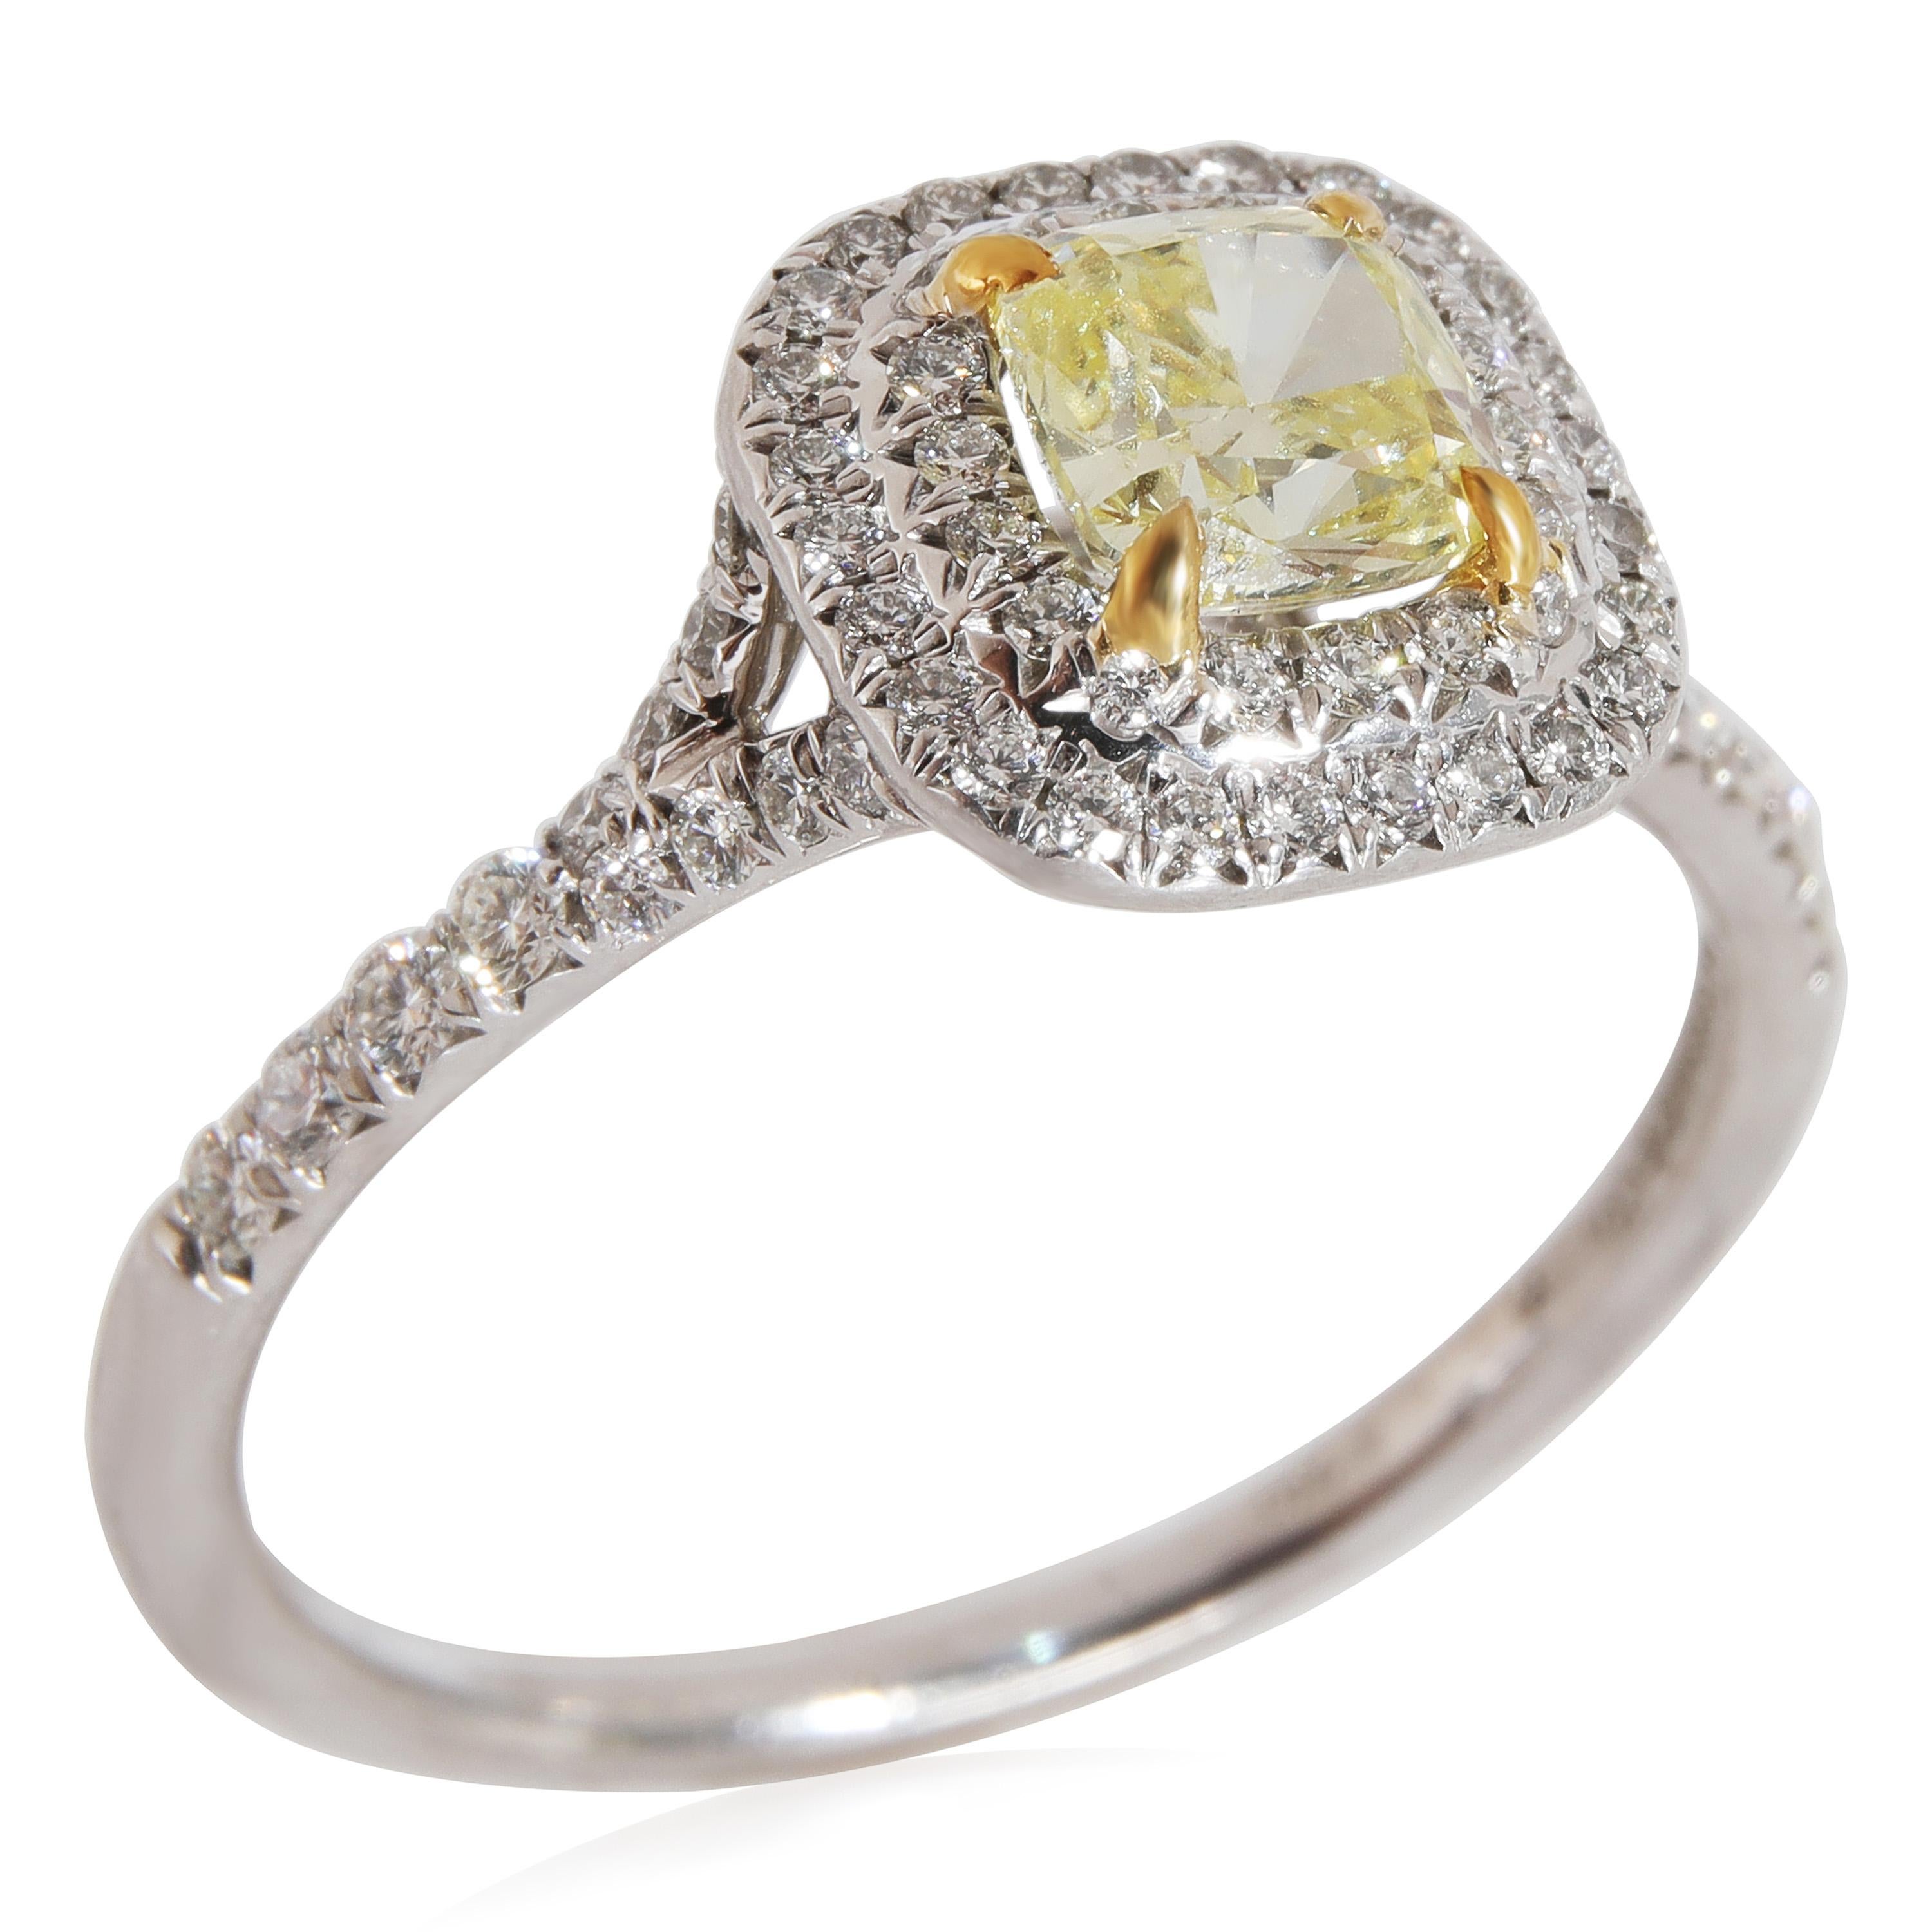 Tiffany & Co. Soleste Halo Diamond Engagement Ring in 18k Yellow Gold 1.03 CTW

PRIMARY DETAILS
SKU: 121727
Listing Title: Tiffany & Co. Soleste Halo Diamond Engagement Ring in 18k Yellow Gold 1.03 CTW
Condition Description: Retails for 13000 USD.